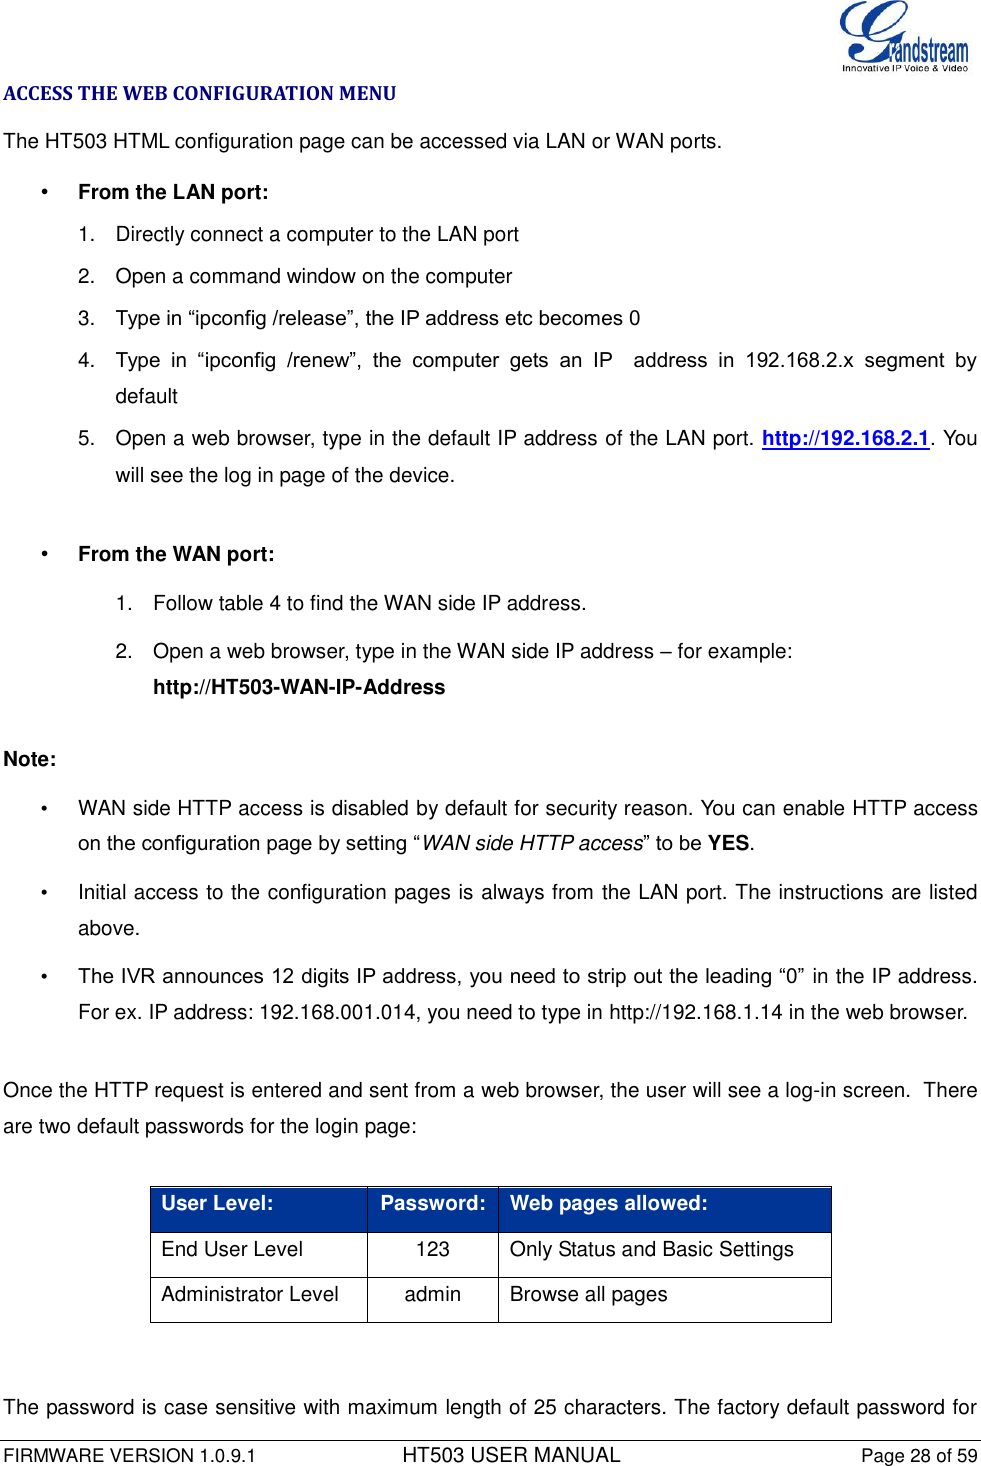  FIRMWARE VERSION 1.0.9.1          HT503 USER MANUAL Page 28 of 59       ACCESS THE WEB CONFIGURATION MENU The HT503 HTML configuration page can be accessed via LAN or WAN ports. • From the LAN port: 1.  Directly connect a computer to the LAN port  2.  Open a command window on the computer 3. Type in “ipconfig /release”, the IP address etc becomes 0 4. Type  in  “ipconfig  /renew”,  the  computer  gets  an  IP    address  in  192.168.2.x  segment  by default 5.  Open a web browser, type in the default IP address of the LAN port. http://192.168.2.1. You will see the log in page of the device.   • From the WAN port: 1.  Follow table 4 to find the WAN side IP address. 2.  Open a web browser, type in the WAN side IP address – for example: http://HT503-WAN-IP-Address  Note:   •  WAN side HTTP access is disabled by default for security reason. You can enable HTTP access on the configuration page by setting “WAN side HTTP access” to be YES.  •  Initial access to the configuration pages is always from the LAN port. The instructions are listed above. • The IVR announces 12 digits IP address, you need to strip out the leading “0” in the IP address. For ex. IP address: 192.168.001.014, you need to type in http://192.168.1.14 in the web browser.   Once the HTTP request is entered and sent from a web browser, the user will see a log-in screen.  There are two default passwords for the login page:   User Level: Password: Web pages allowed: End User Level 123 Only Status and Basic Settings Administrator Level admin Browse all pages    The password is case sensitive with maximum length of 25 characters. The factory default password for 